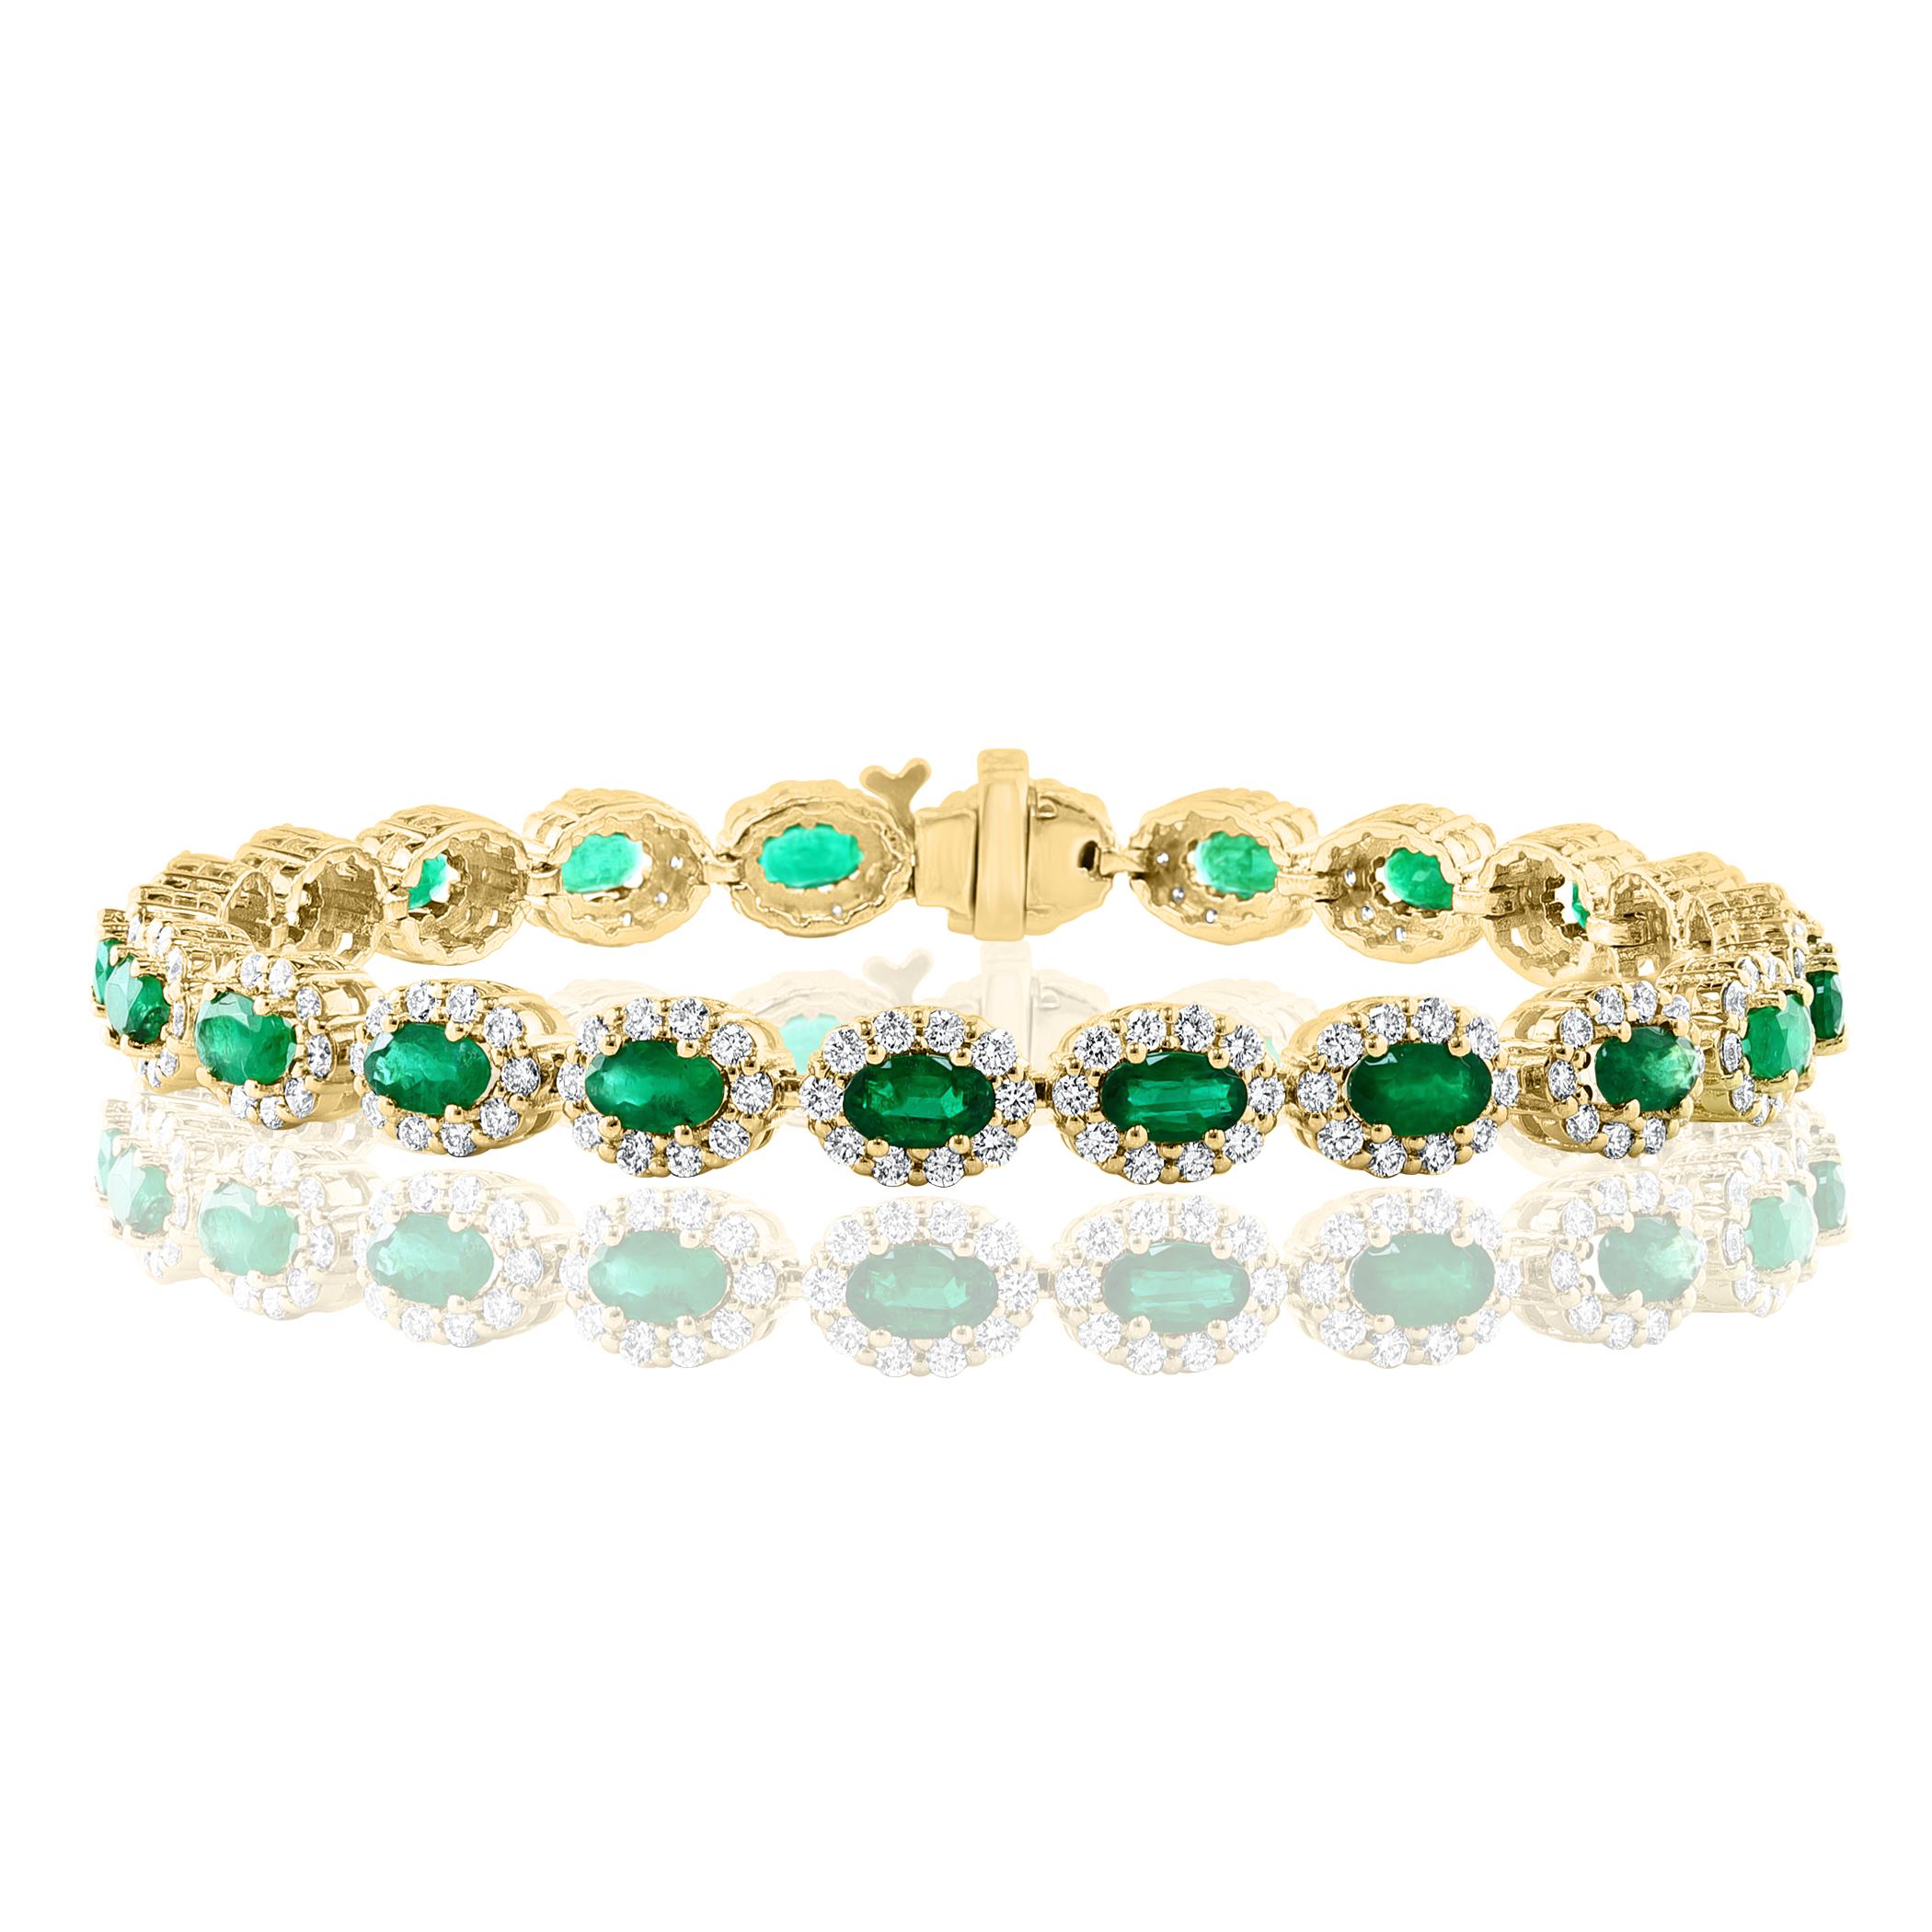 A beautiful Emerald and diamond bracelet showcasing color-rich emeralds, surrounded by a single row of brilliant round diamonds. 22 Oval cut emeralds weigh 4.69 carats total; 220 accent diamonds weigh 3.08 carats total. made in 14K Yellow